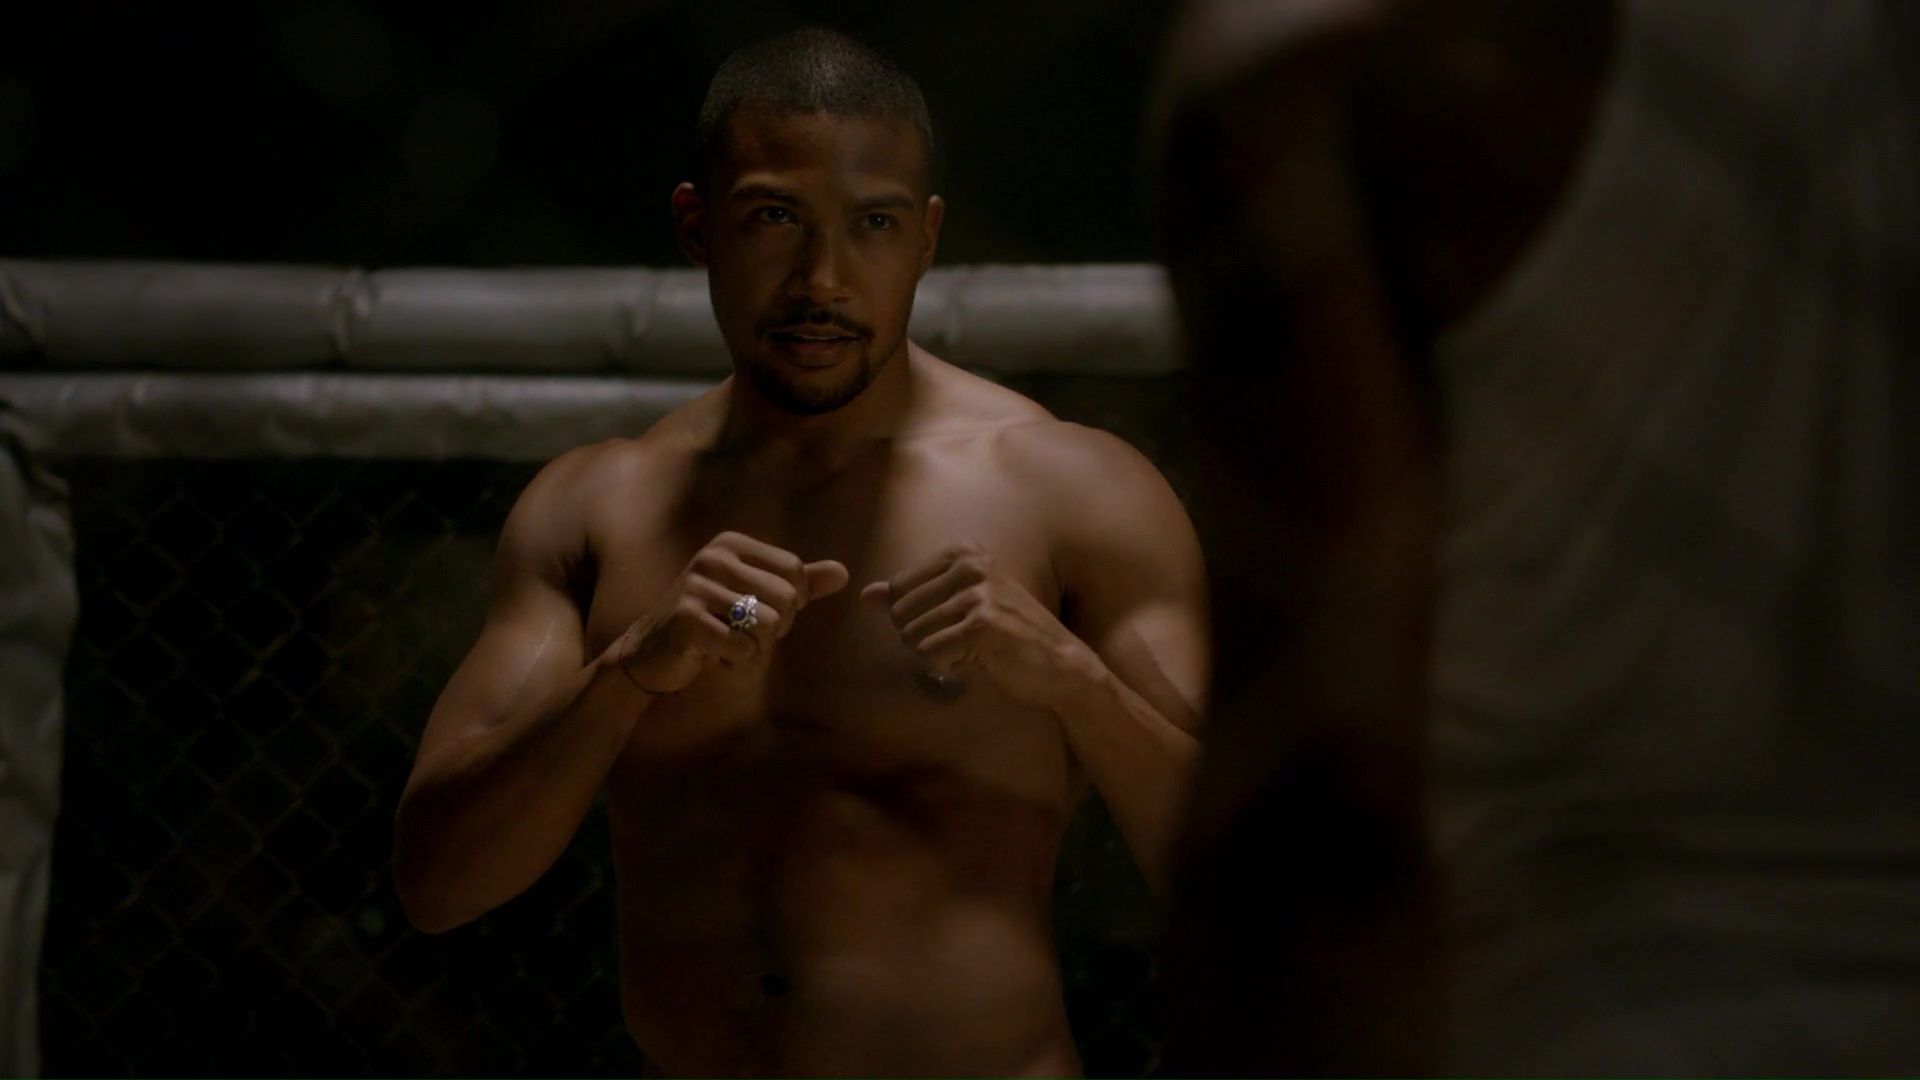 Charles Michael Davis shirtless in The Originals 3-01 "For the Next Mi...